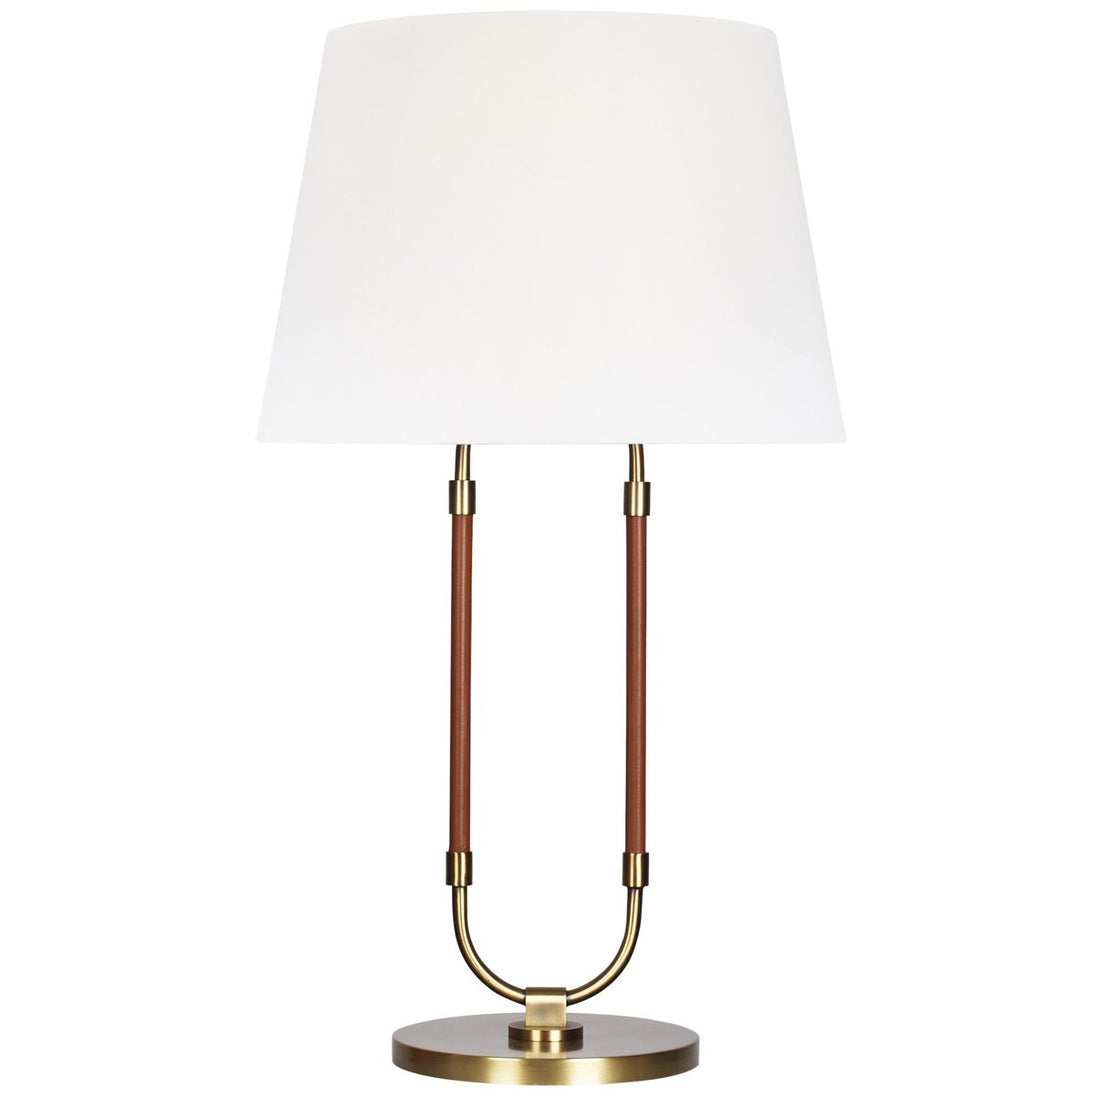 Feiss Katie Table Lamp